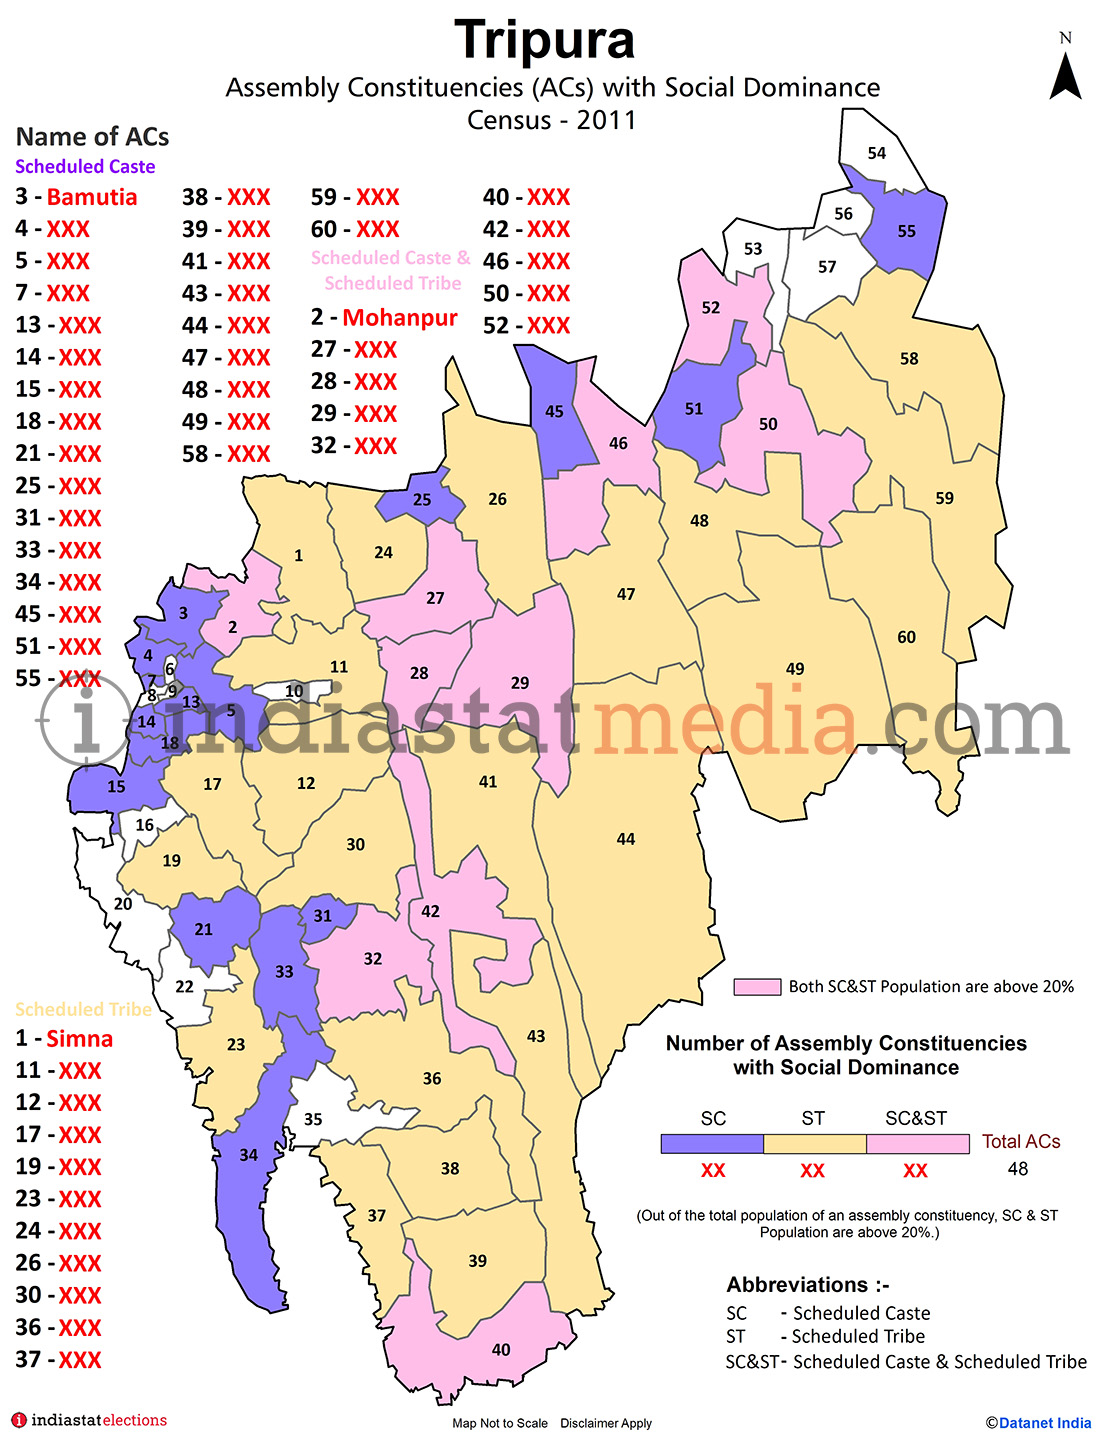 Assembly Constituencies with Social Dominance in Tripura - Census 2011